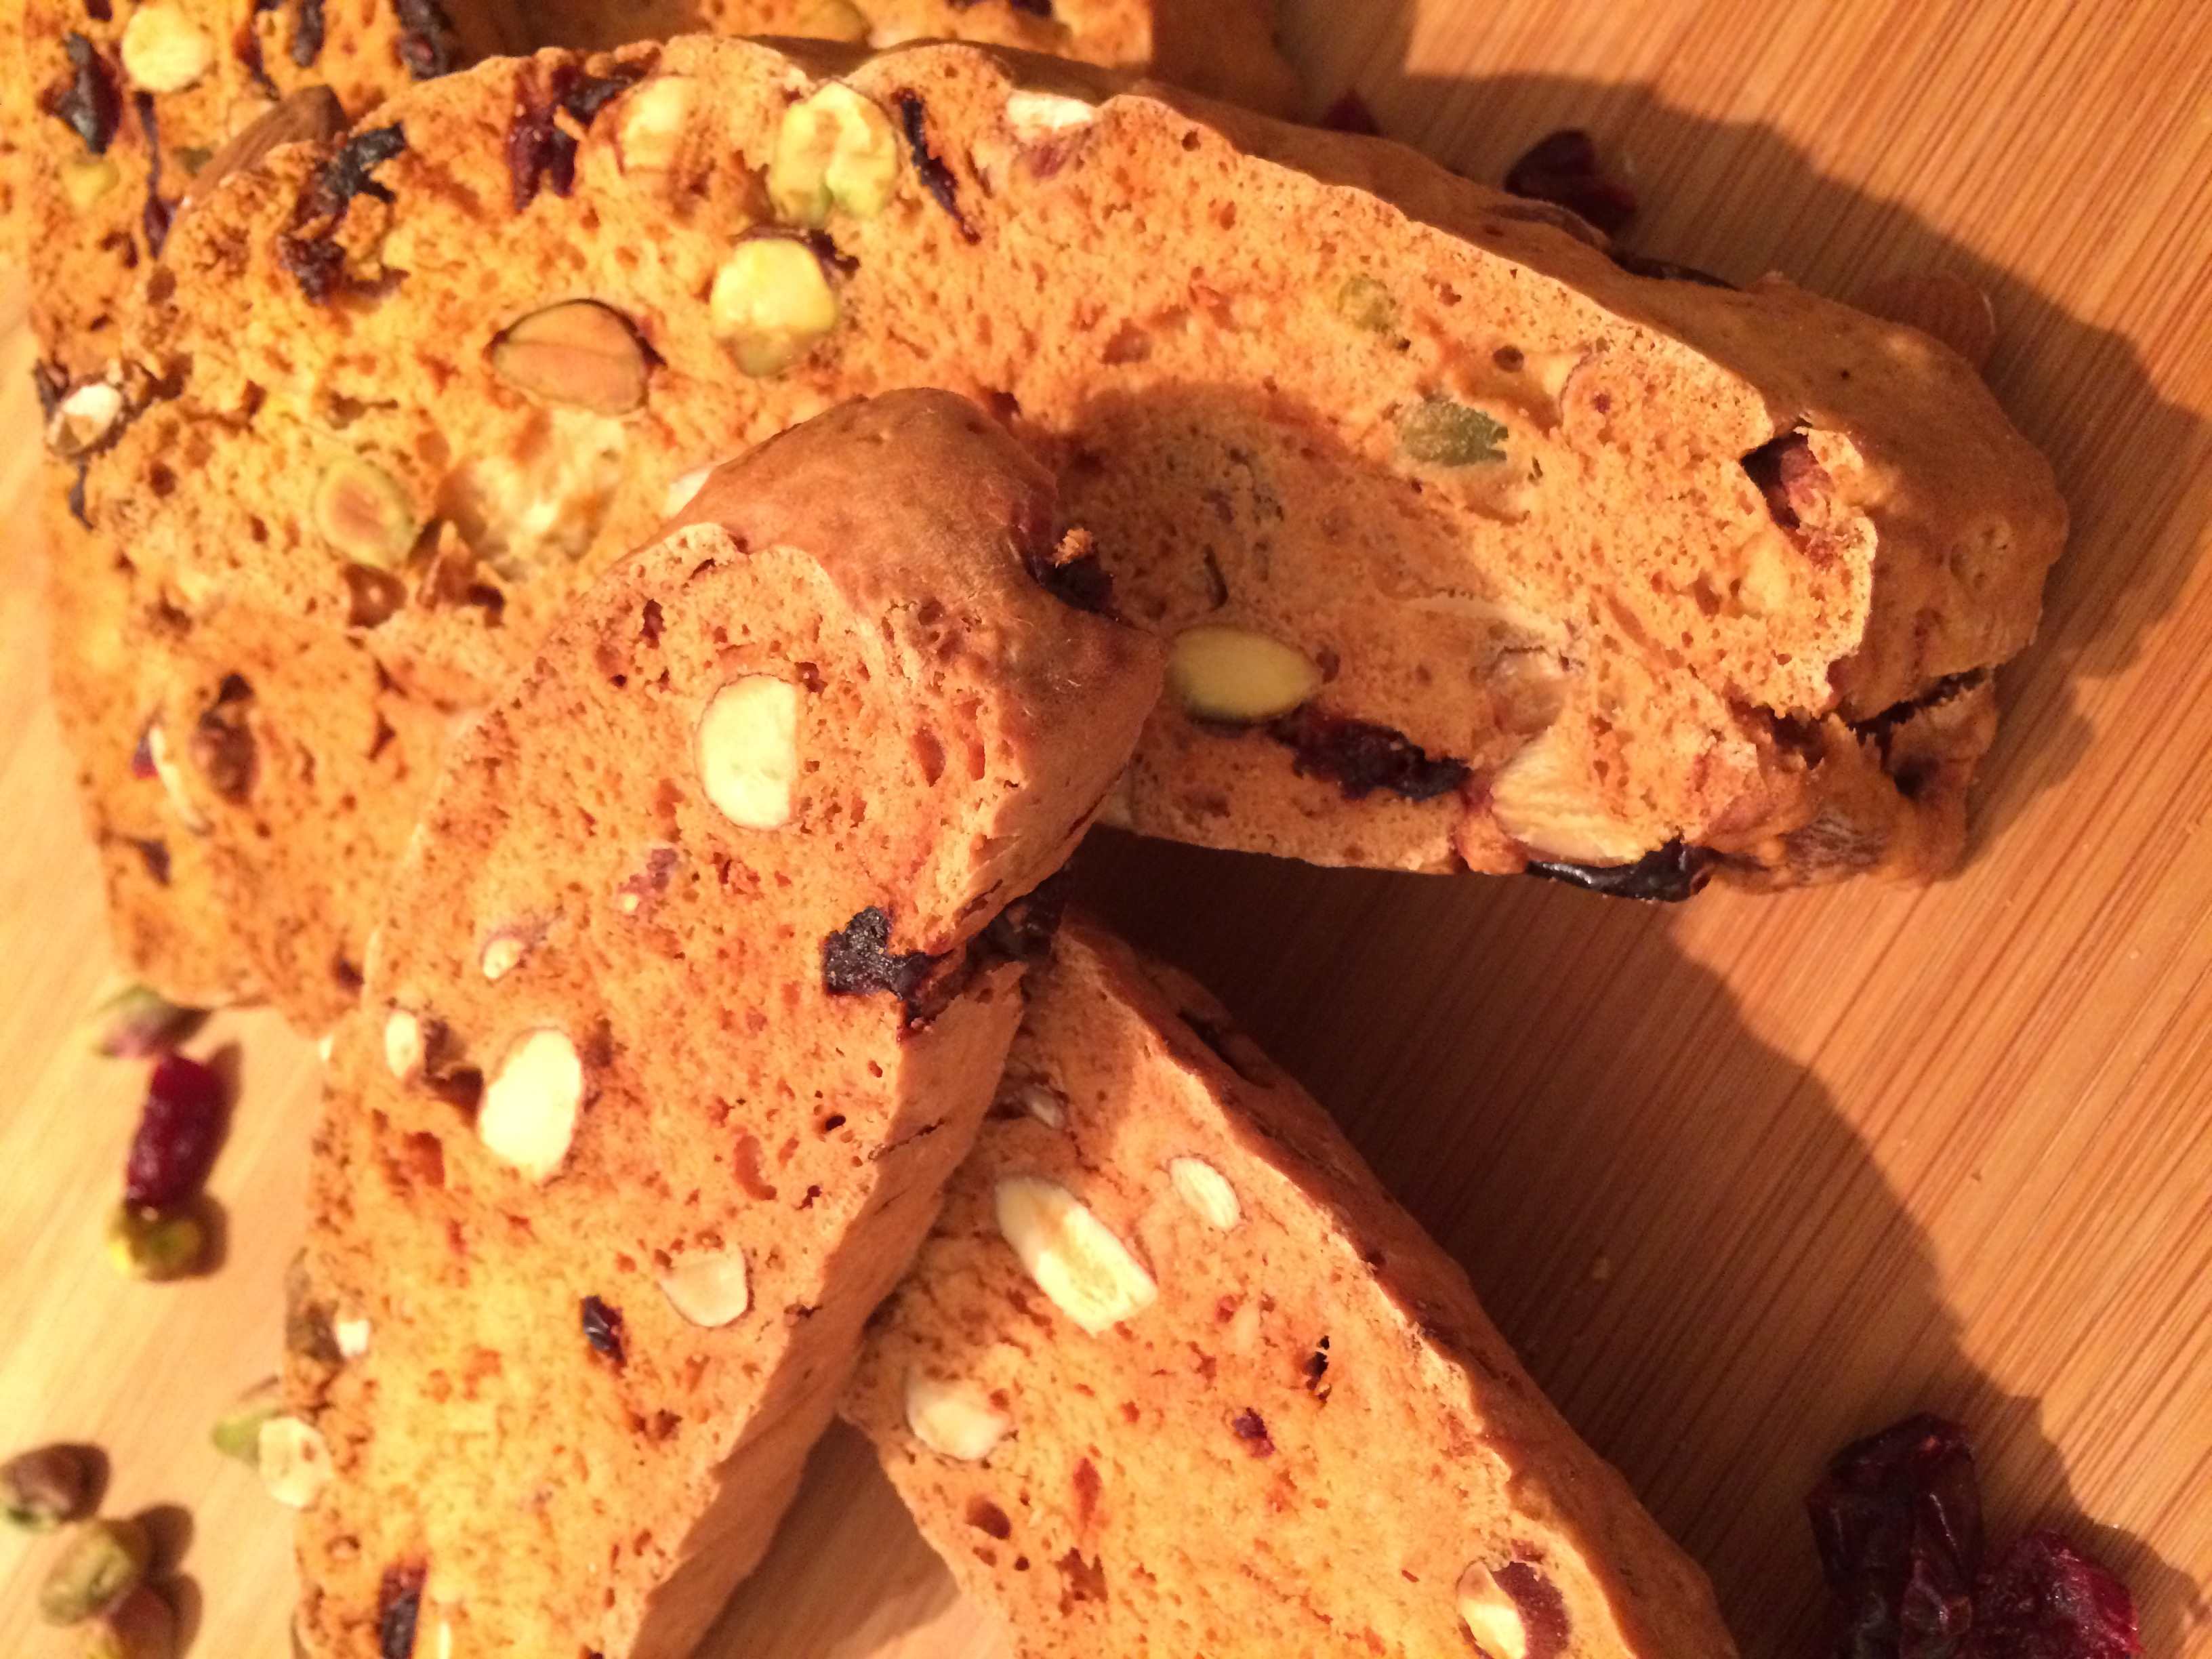 Biscotti with a difference